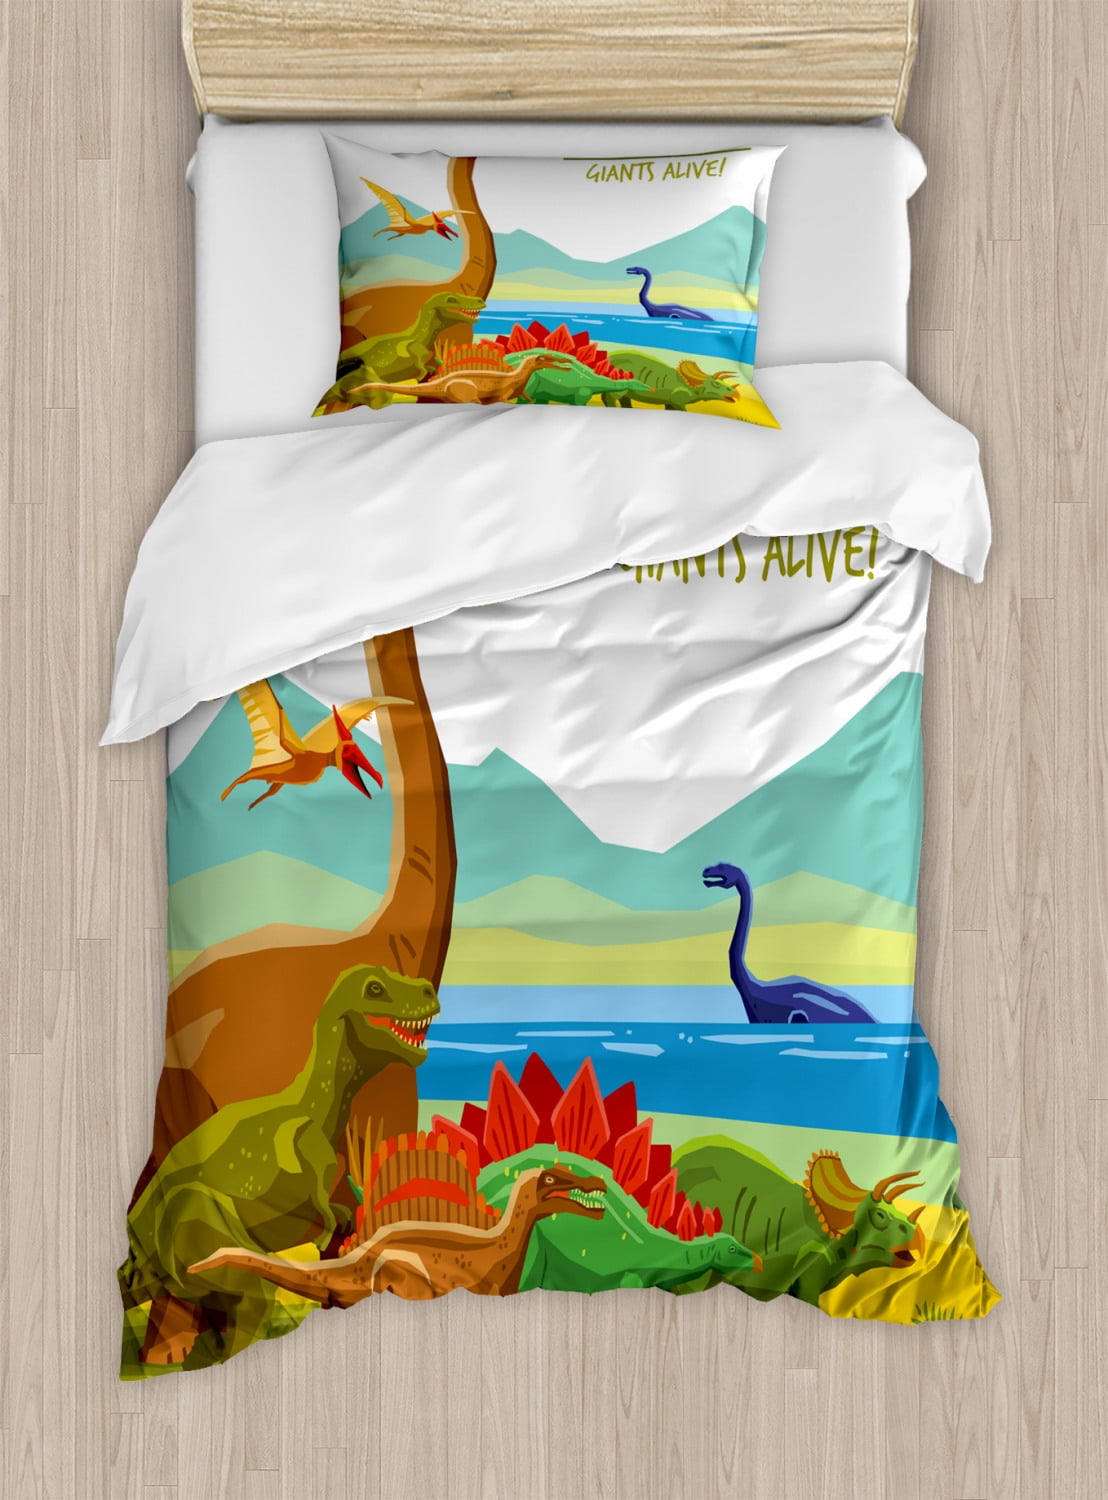 Multicolor Cartoon Dinosaur Images with Other Elements from Jurassic Fauna Cute Creatures 2 Piece Decorative Quilted Bedspread Set with 1 Pillow Sham Lunarable Nursery Coverlet Set Twin Size 